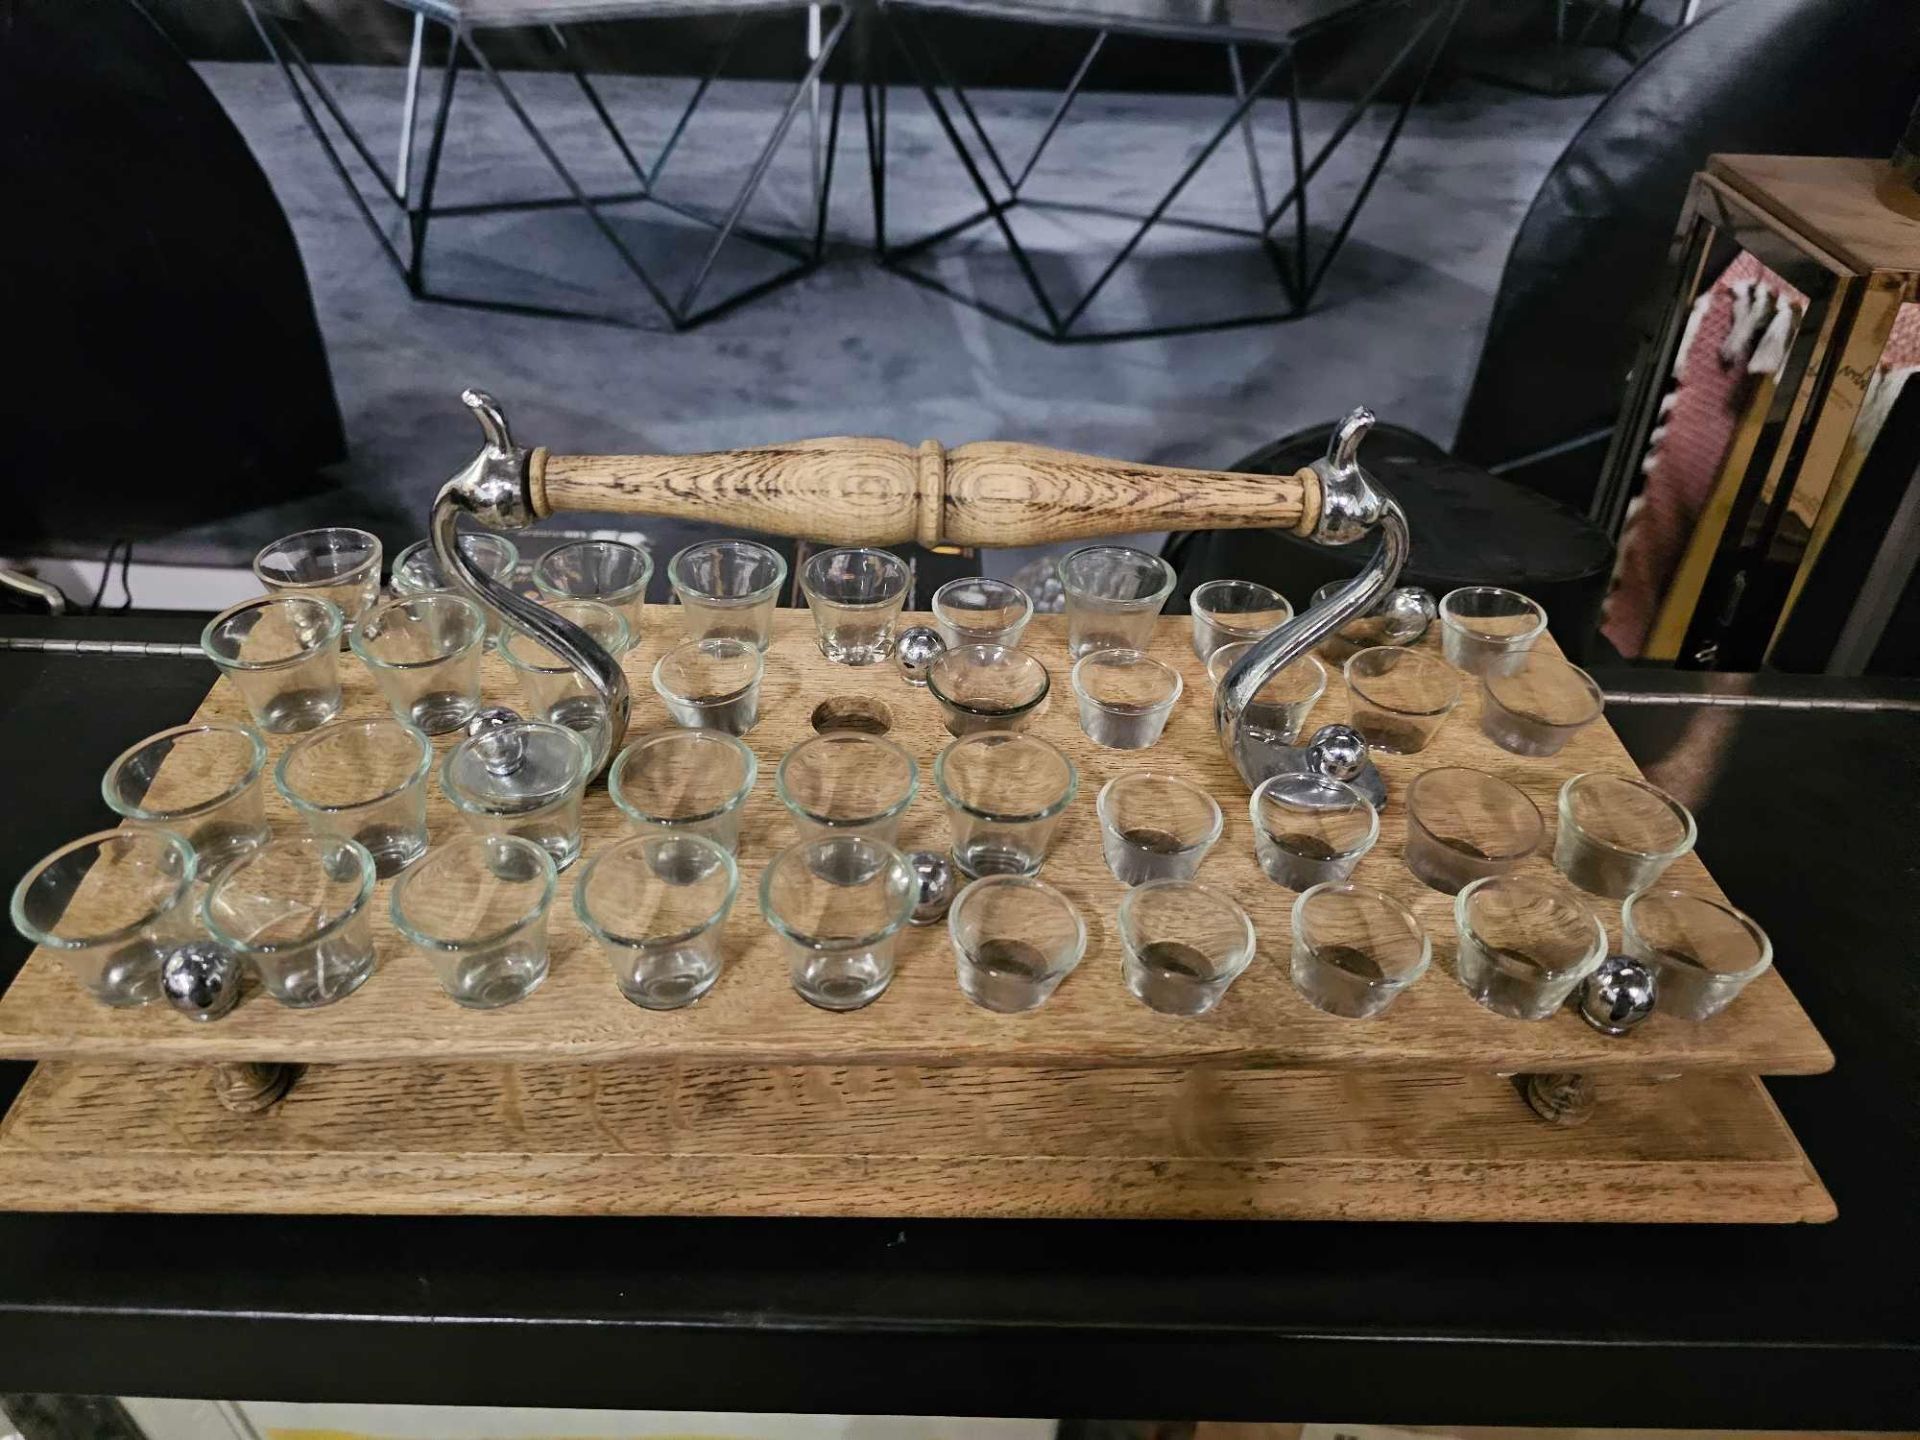 An Oak Service Tray With Handle Holds 40 Glasses (39 Present) Possible A Communion Tray